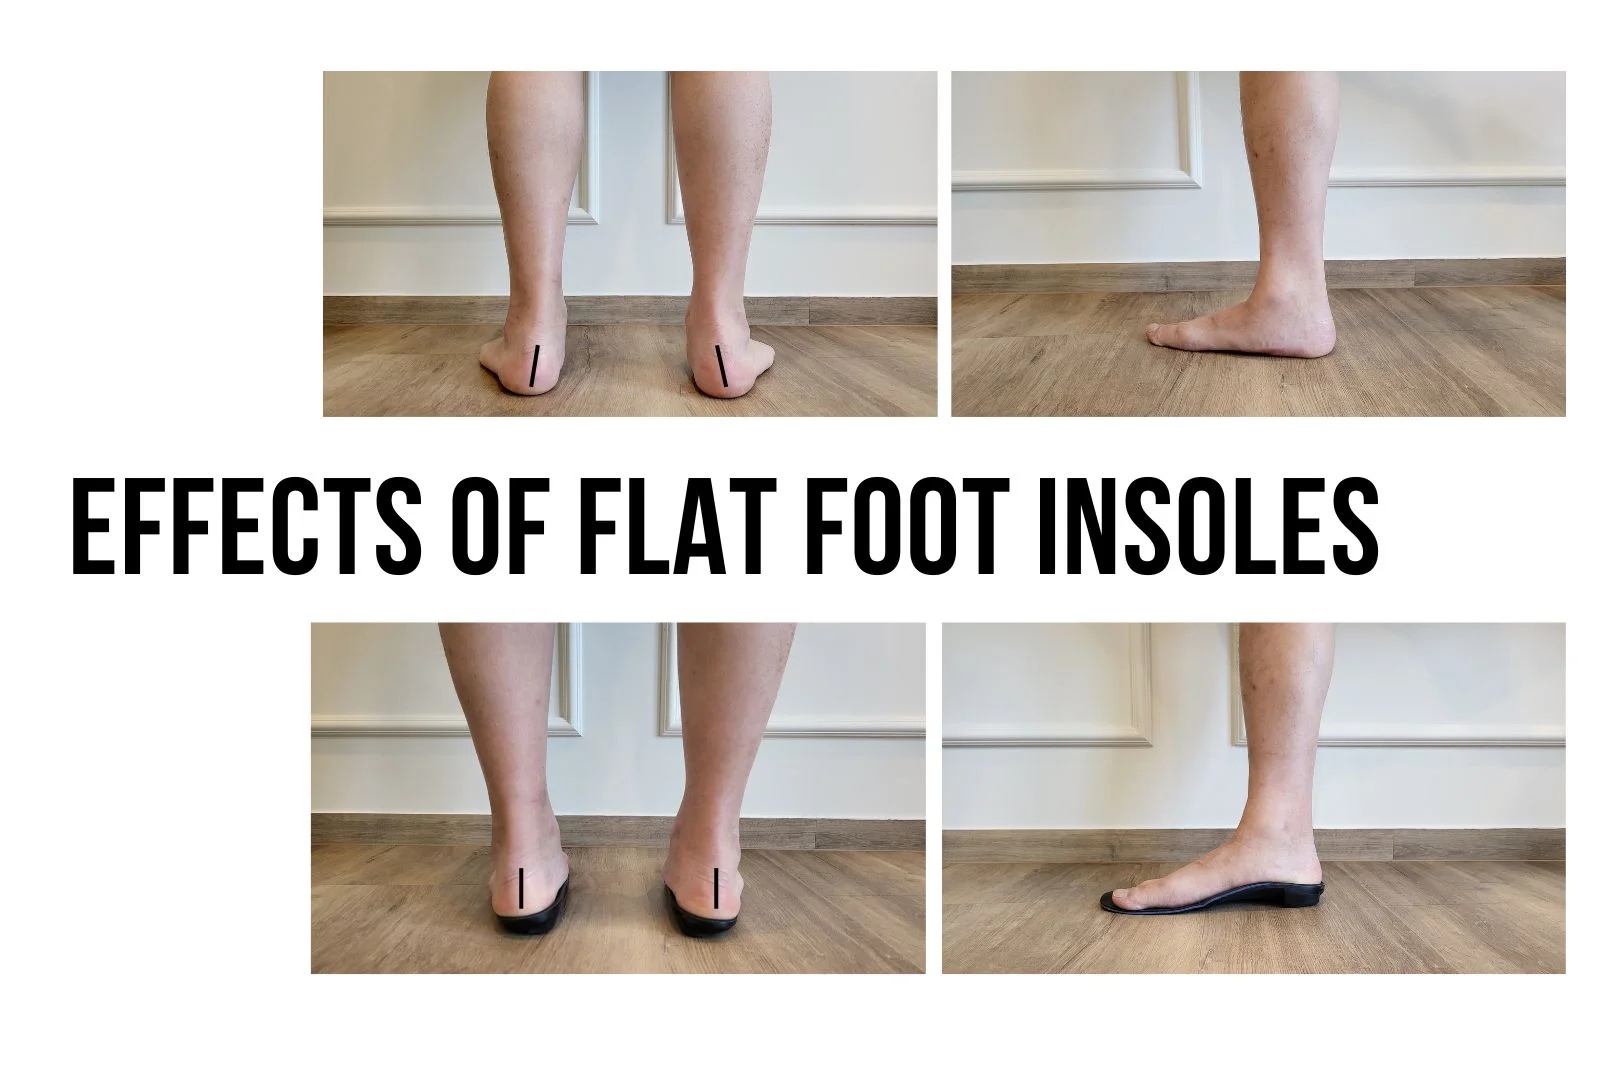 Effects of flat foot insoles